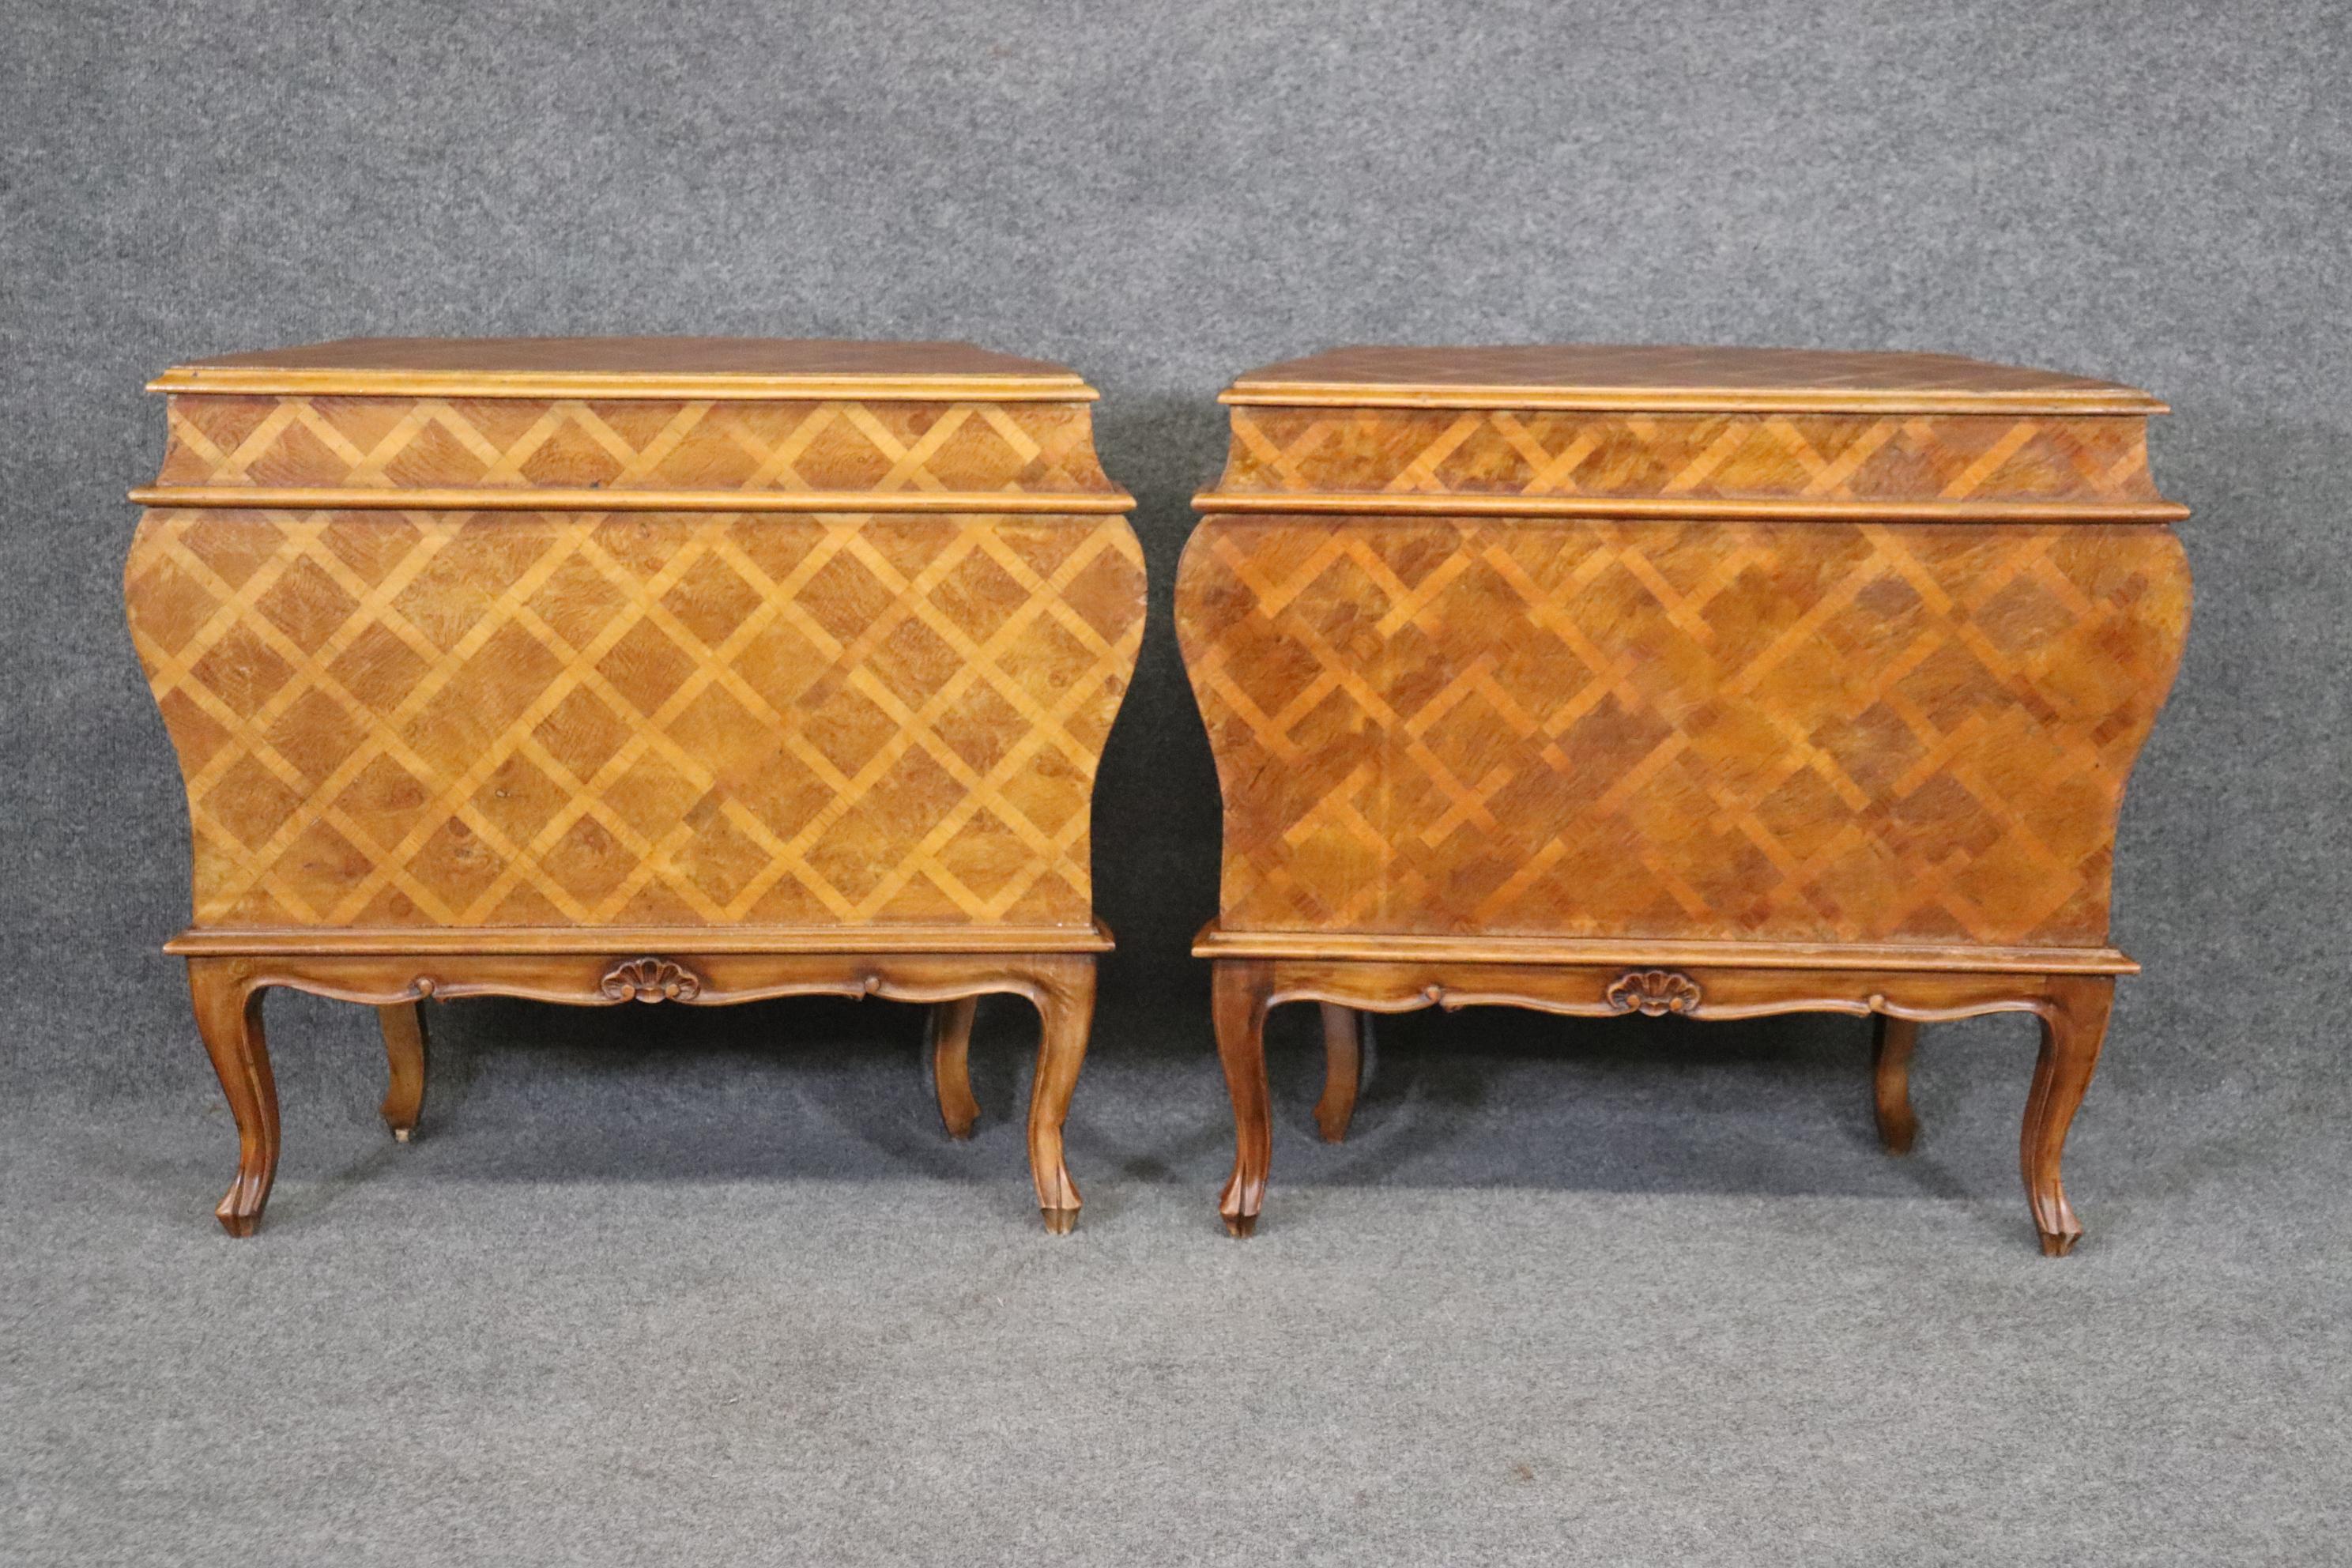 Mid-20th Century Pair of Cross-Hatch Inlaid Olivewood Italian Bombe Nightstands Endtables